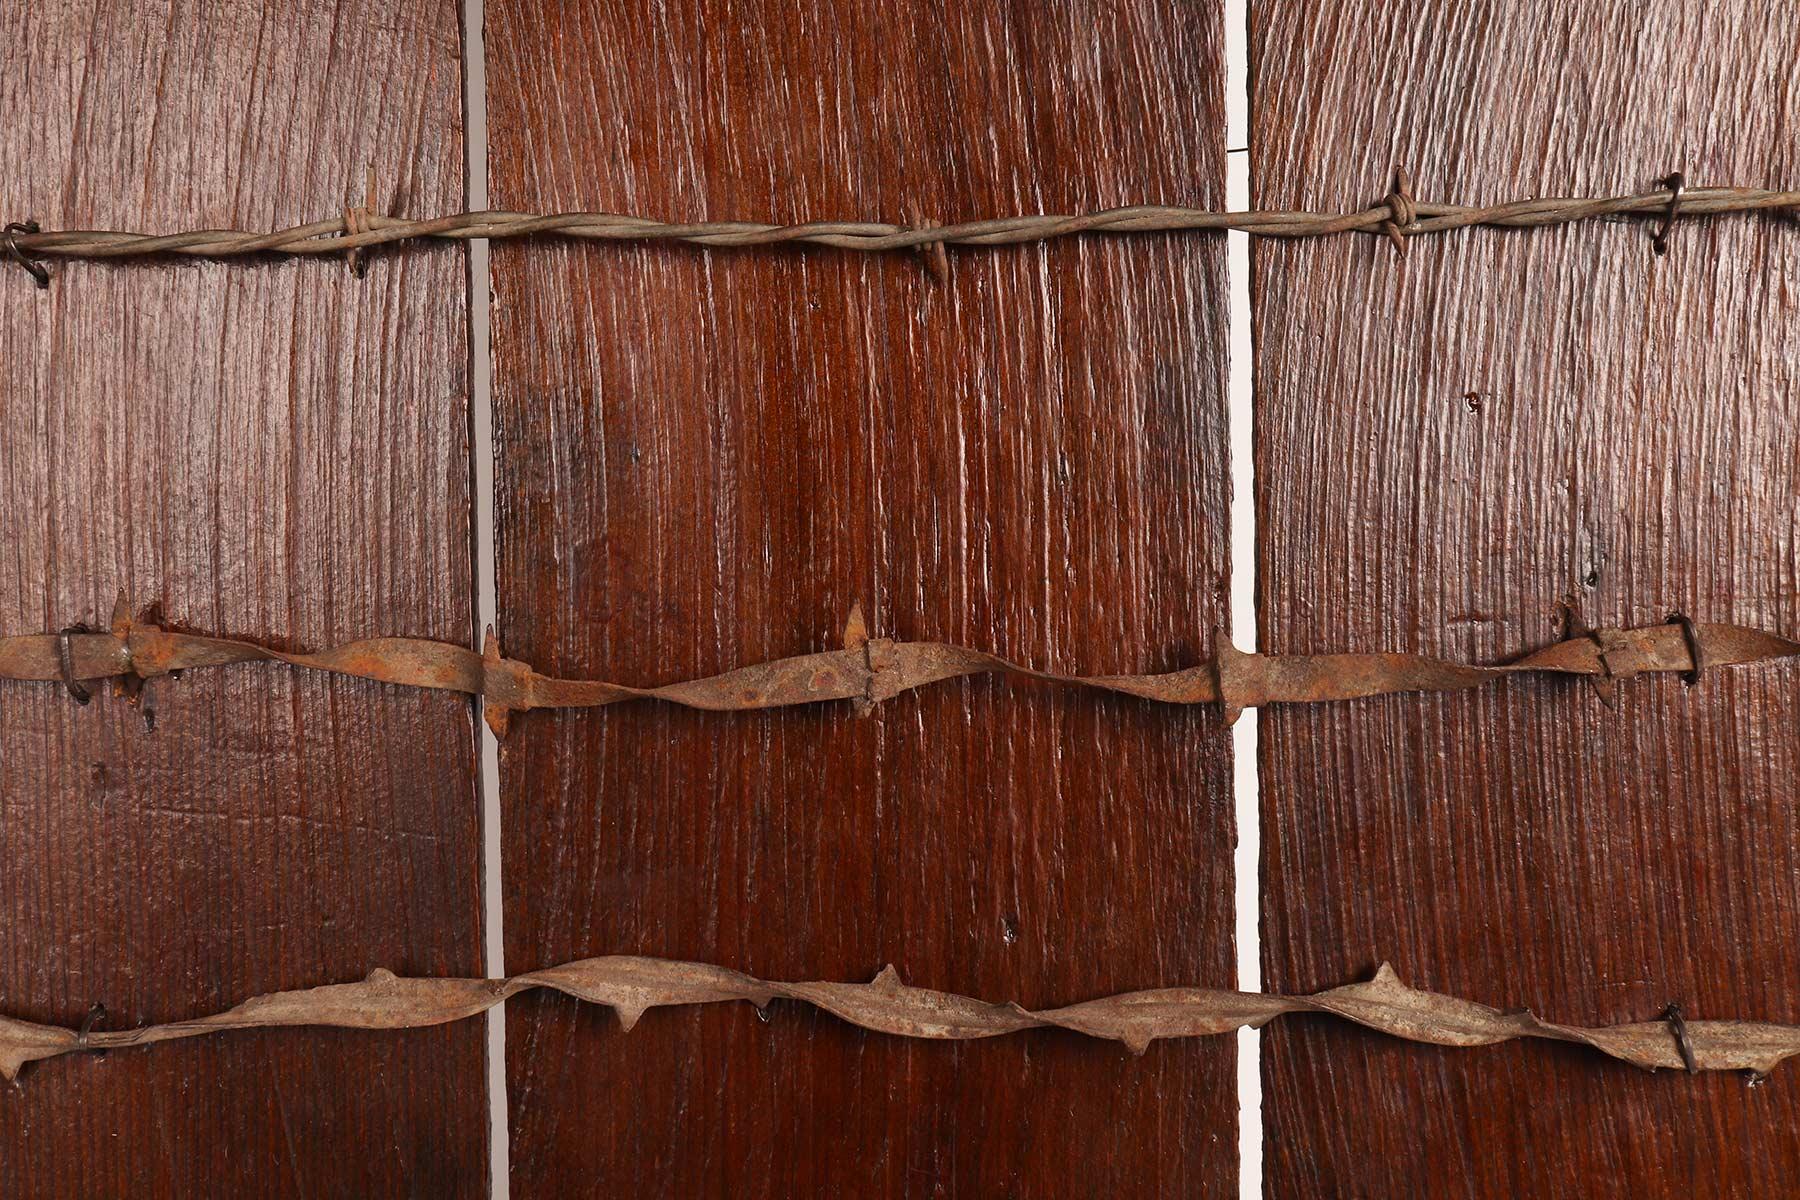 American Antique Barbed Wire Collection on Wooden Board, from California End of 19th Cent For Sale